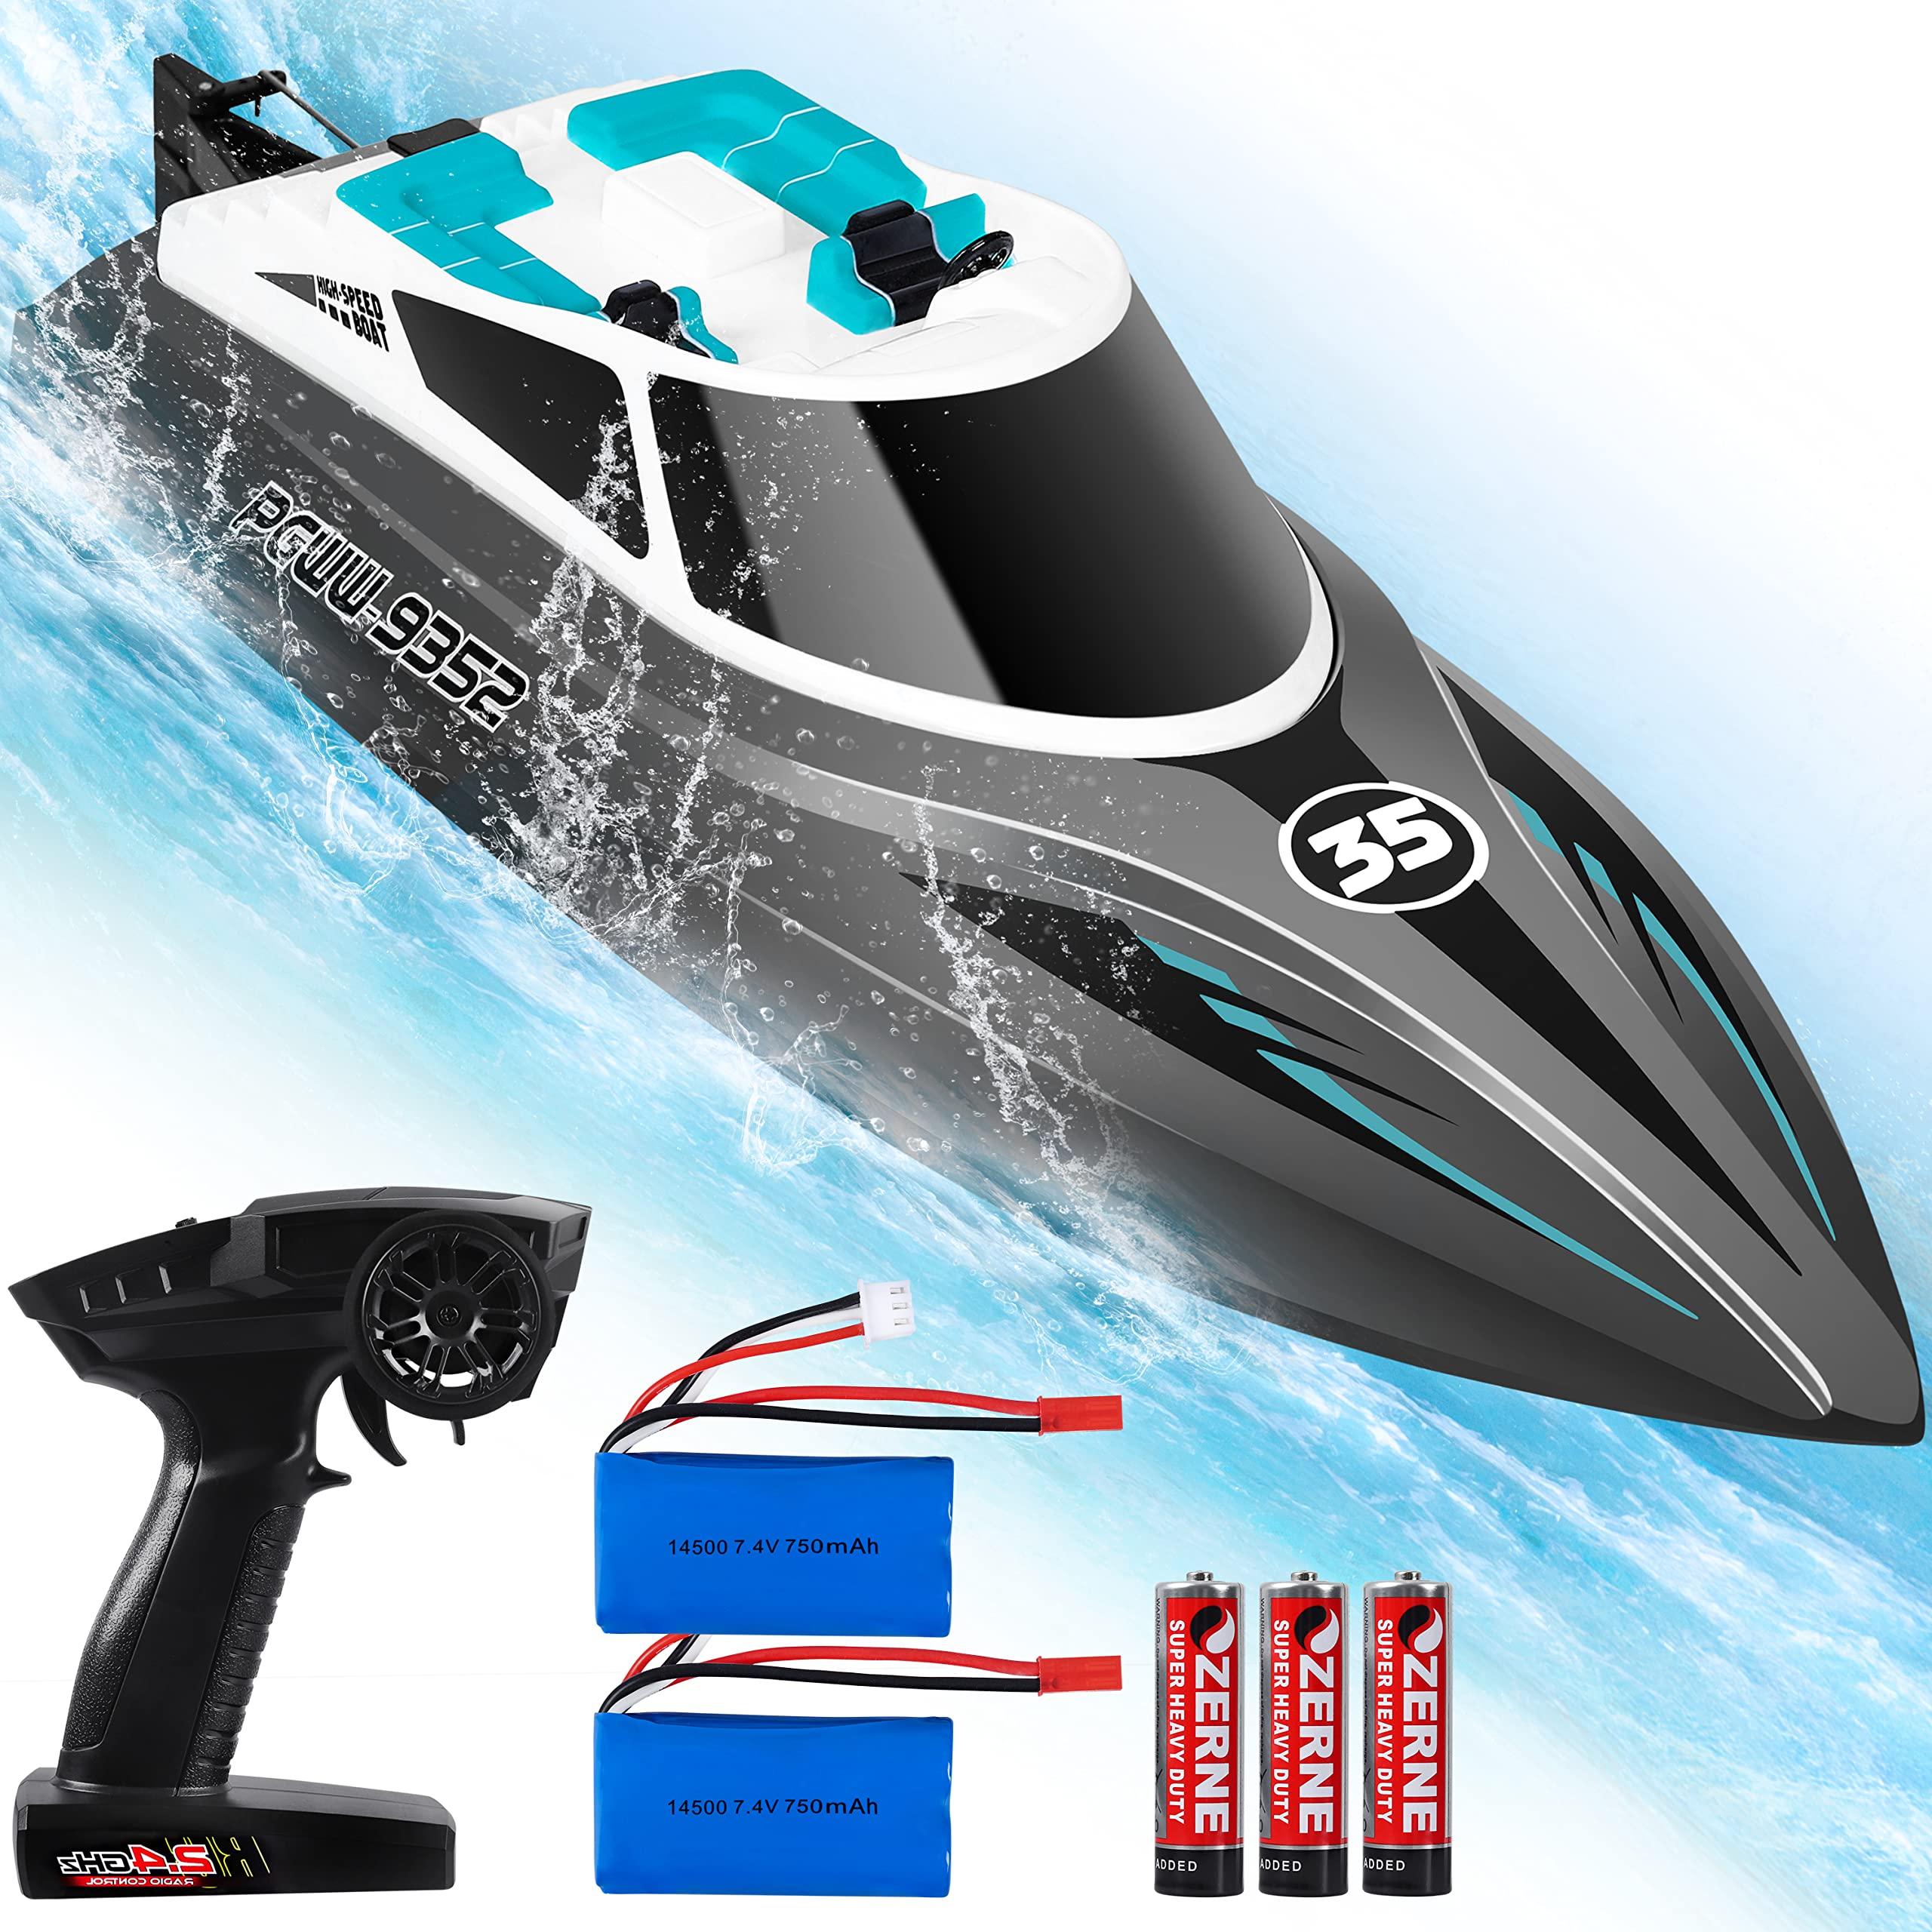 Best Remote Control Boat For Lake: Tips for Choosing the Best RC Boat for the Lake 